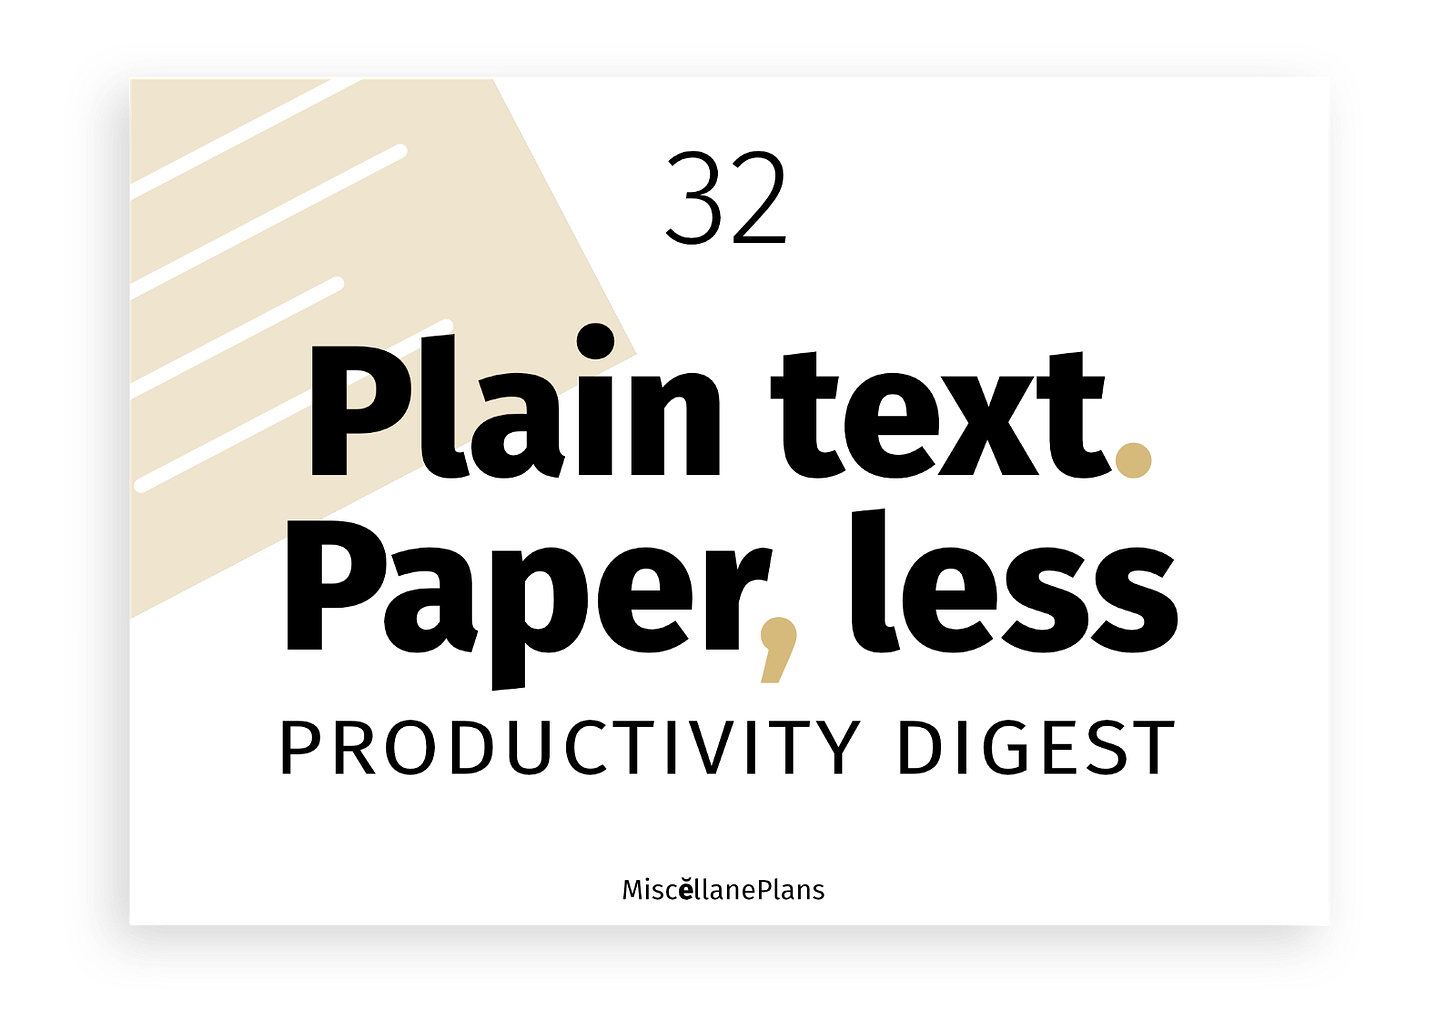 White rectangle with shadow behind it, with the text: 32 Plain text. Paper, less Productivity Digest. Miscellaneplans.